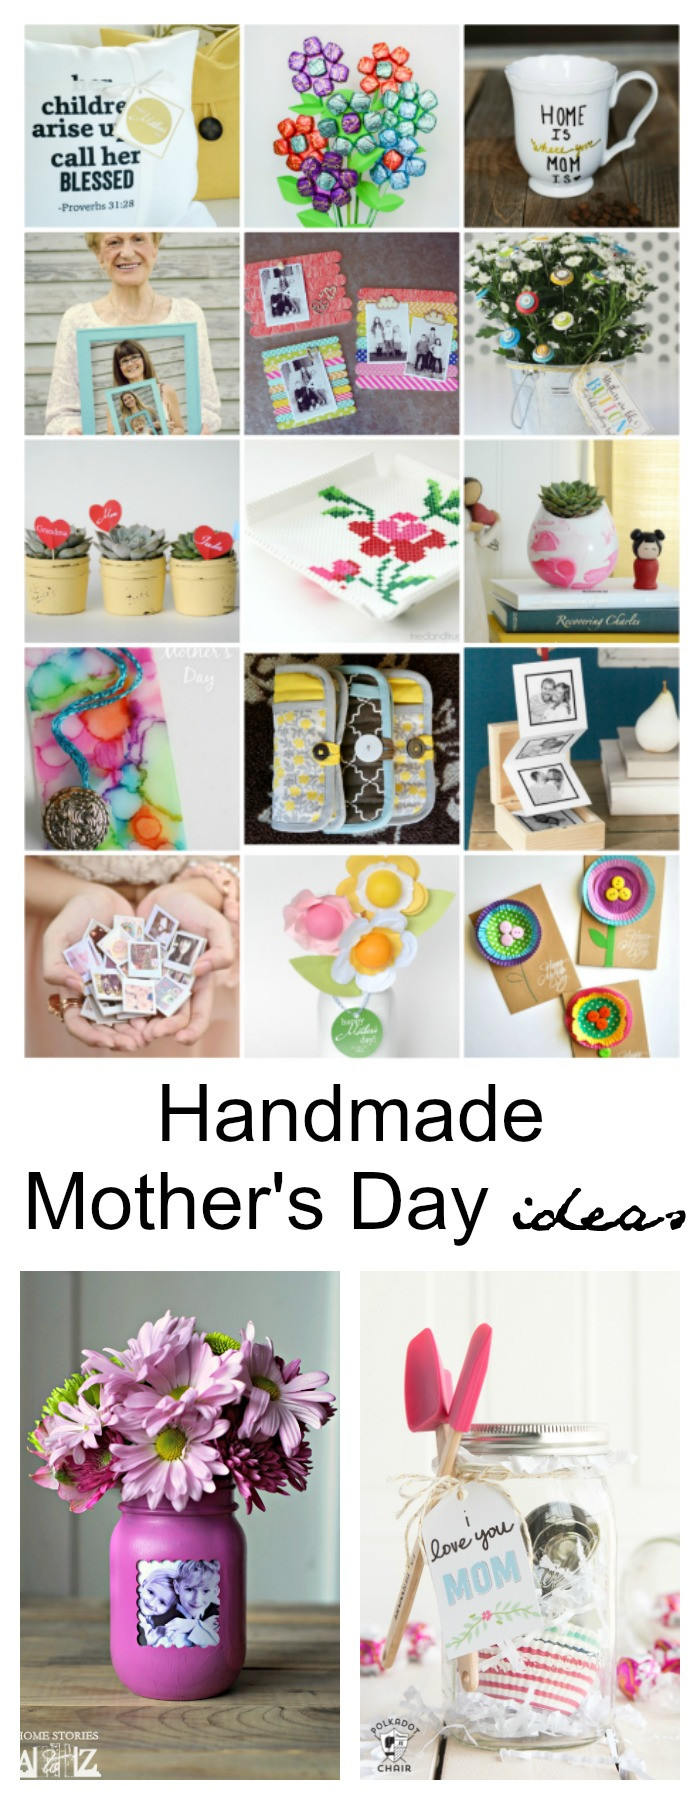 Mother Day Gift Ideas Handmade
 43 DIY Mothers Day Gifts Handmade Gift Ideas For Mom